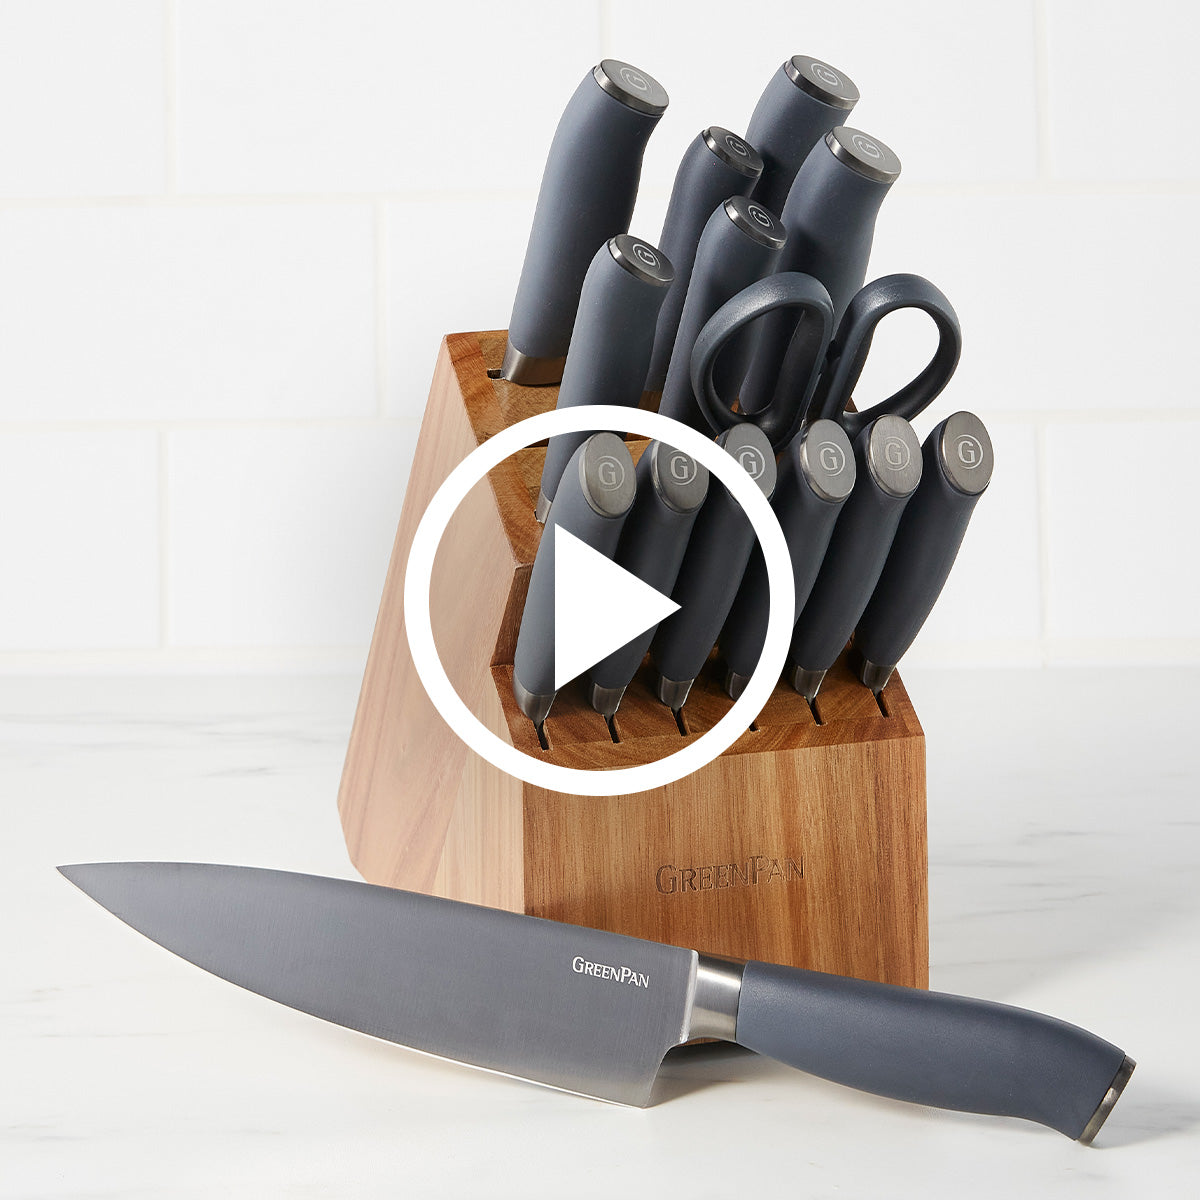 Greenpan 16-Piece Gray/Silver Knife Set with Rubber Handle, Titanium Coated  Blades, Dishwasher Safe, Includes Knife Block and 6 Steak Knives in the  Cutlery department at